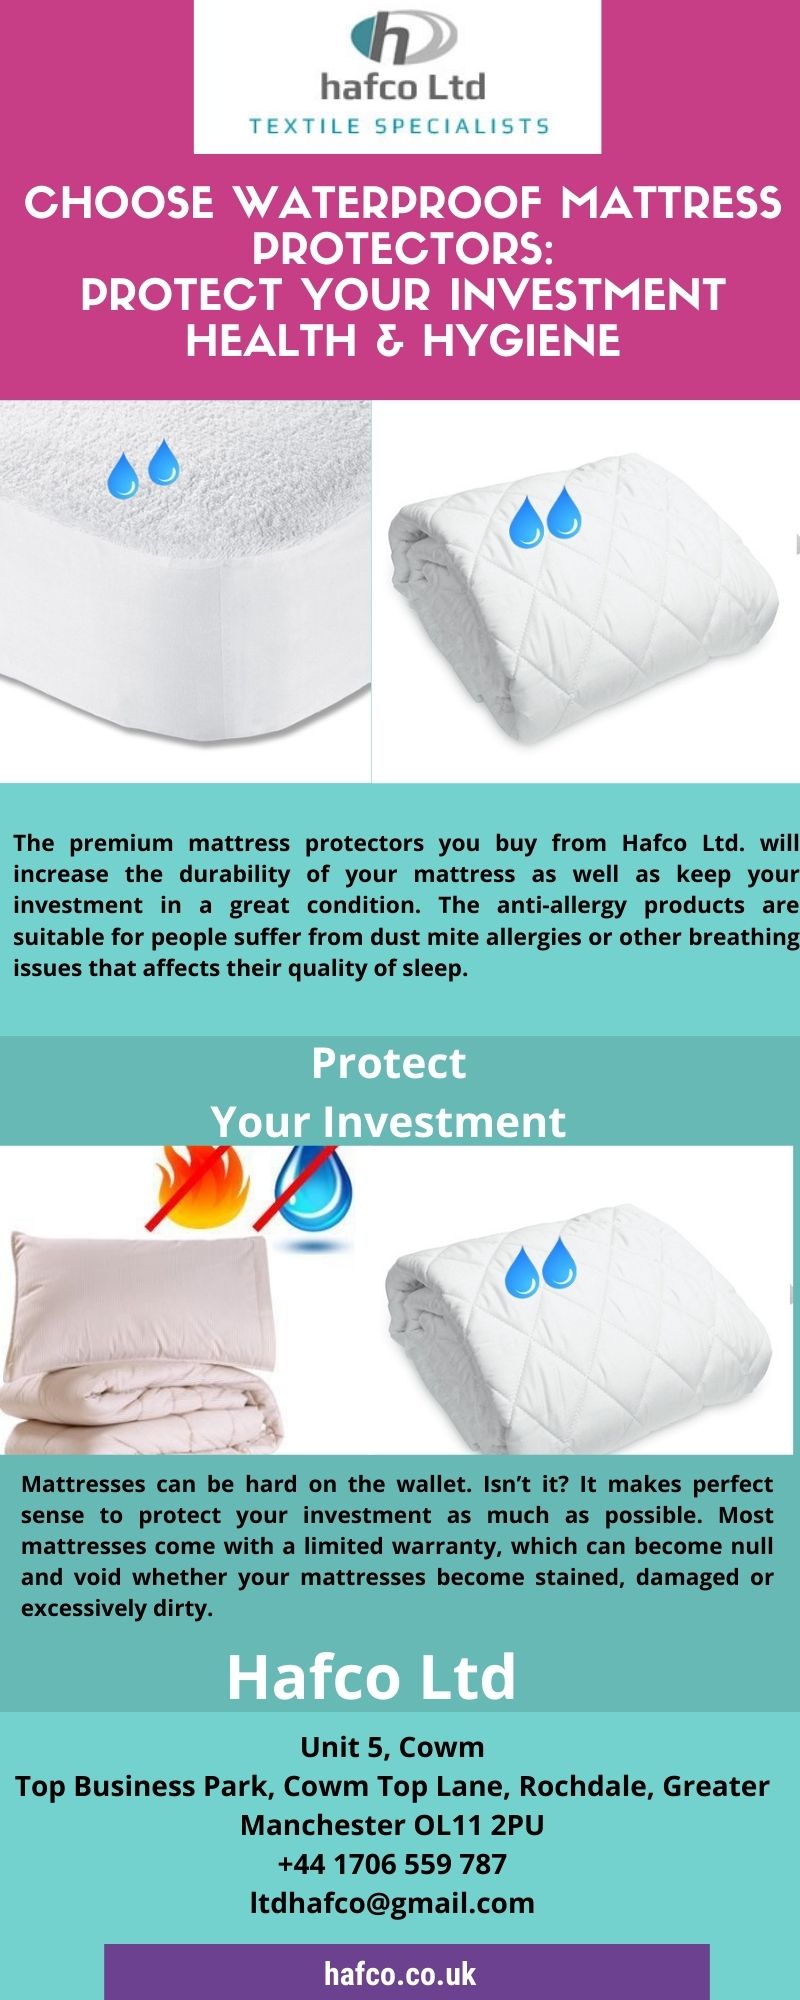 Choose Waterproof Mattress Protectors_ Protect Your Investment, Health & Hygiene.jpg  by hafcoltduk